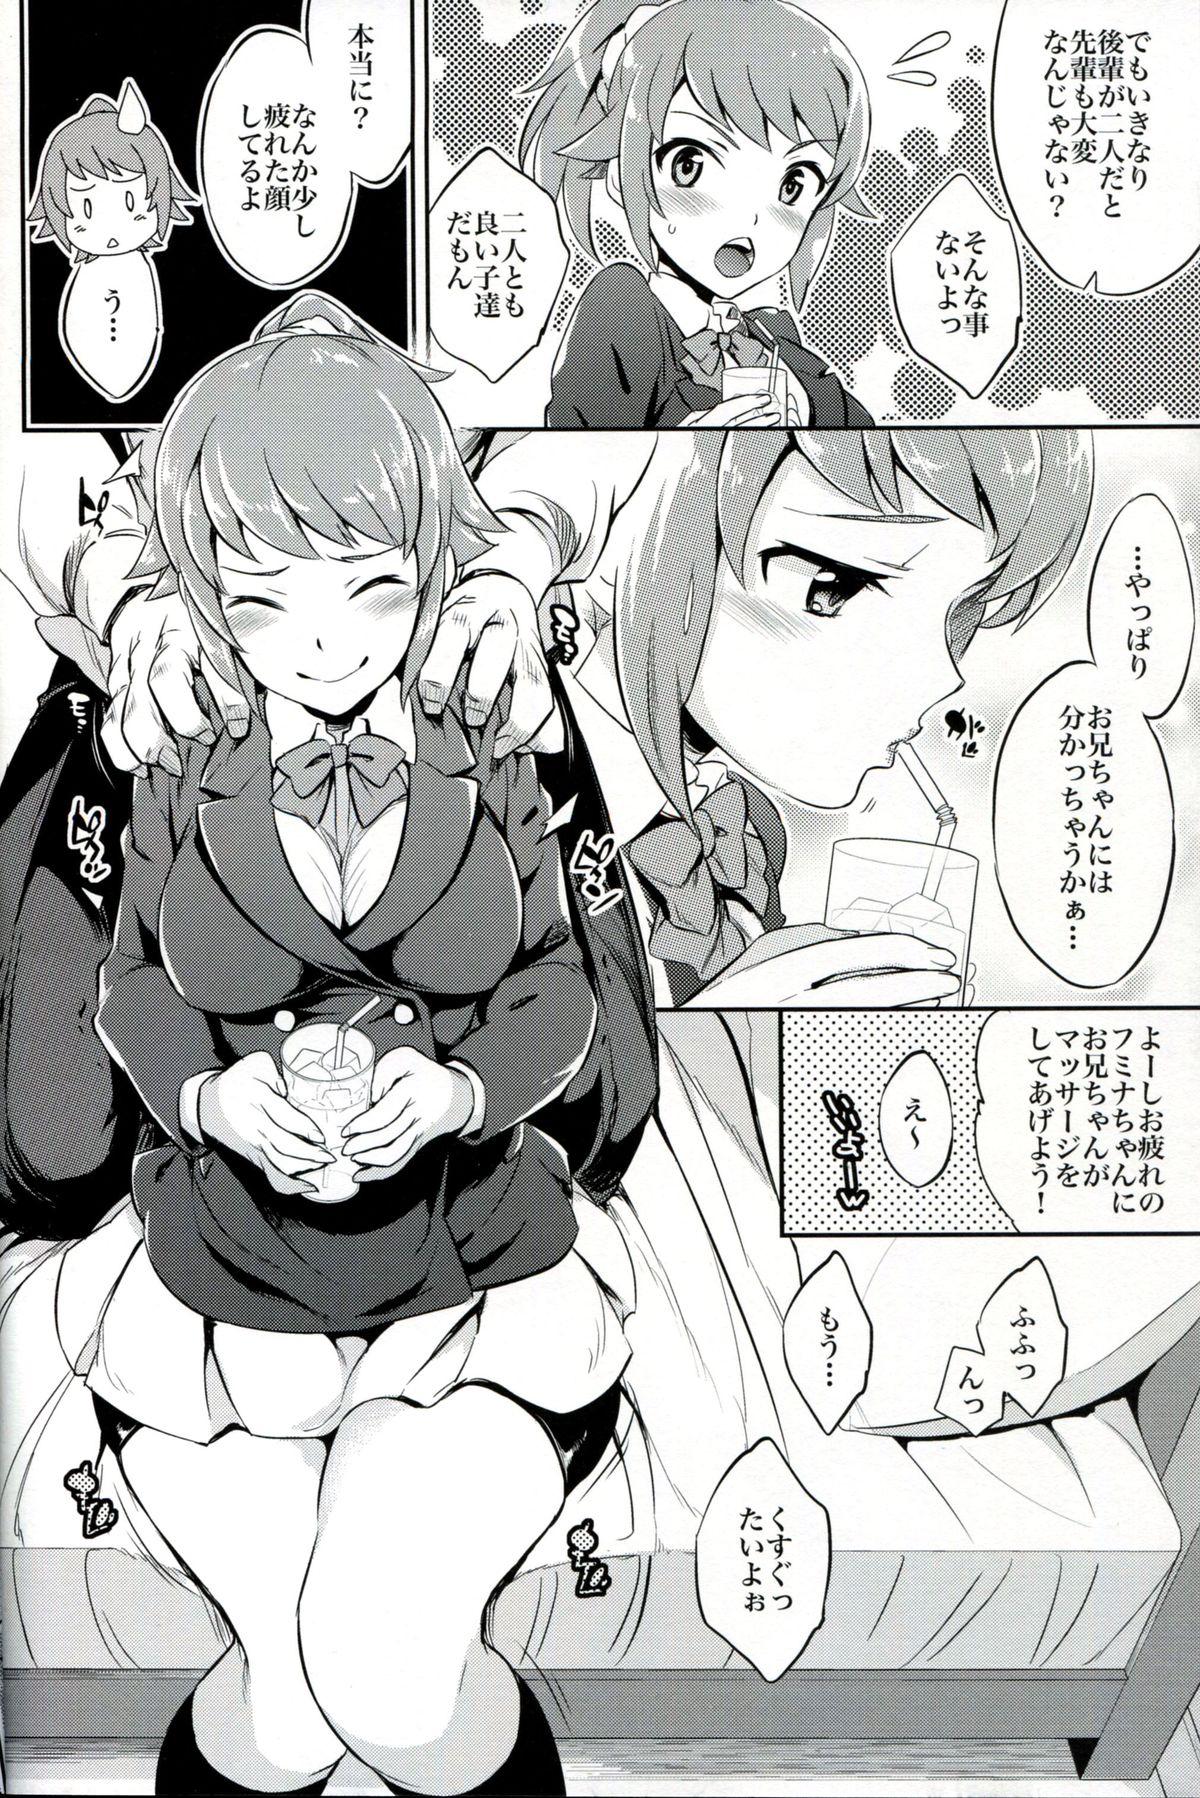 Playing (C87) [Crazy9 (Ichitaka)] C9-15 Fumina-senpai to Mob Onii-chan (Gundam Build Fighters Try) - Gundam build fighters try Big Pussy - Page 5